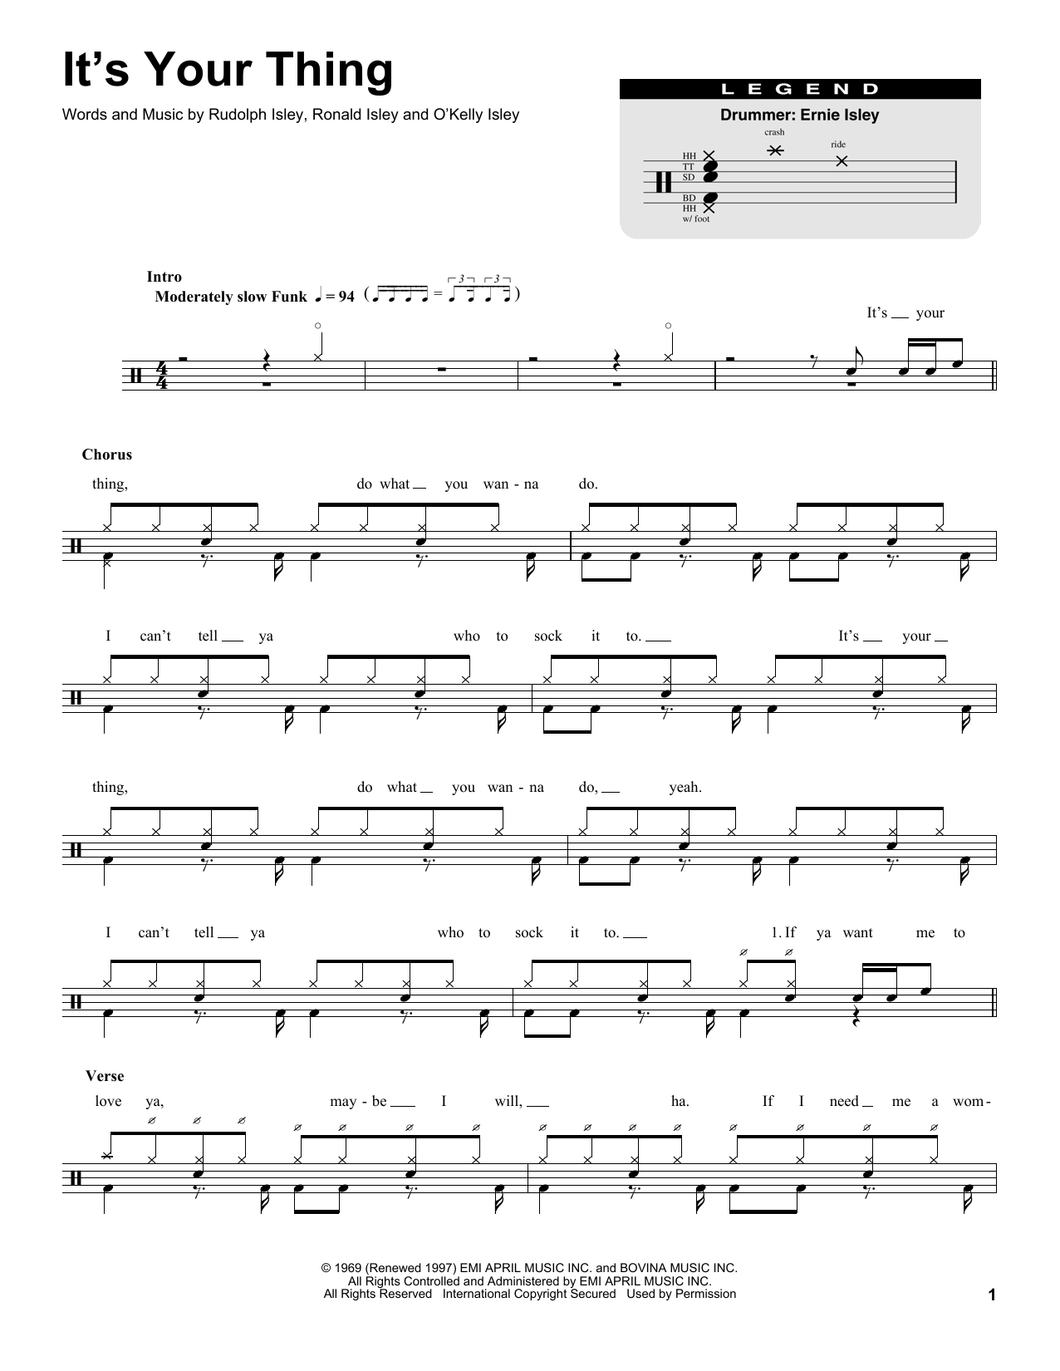 It's Your Thing - The Isley Brothers - Full Drum Transcription / Drum Sheet Music - SheetMusicDirect DT